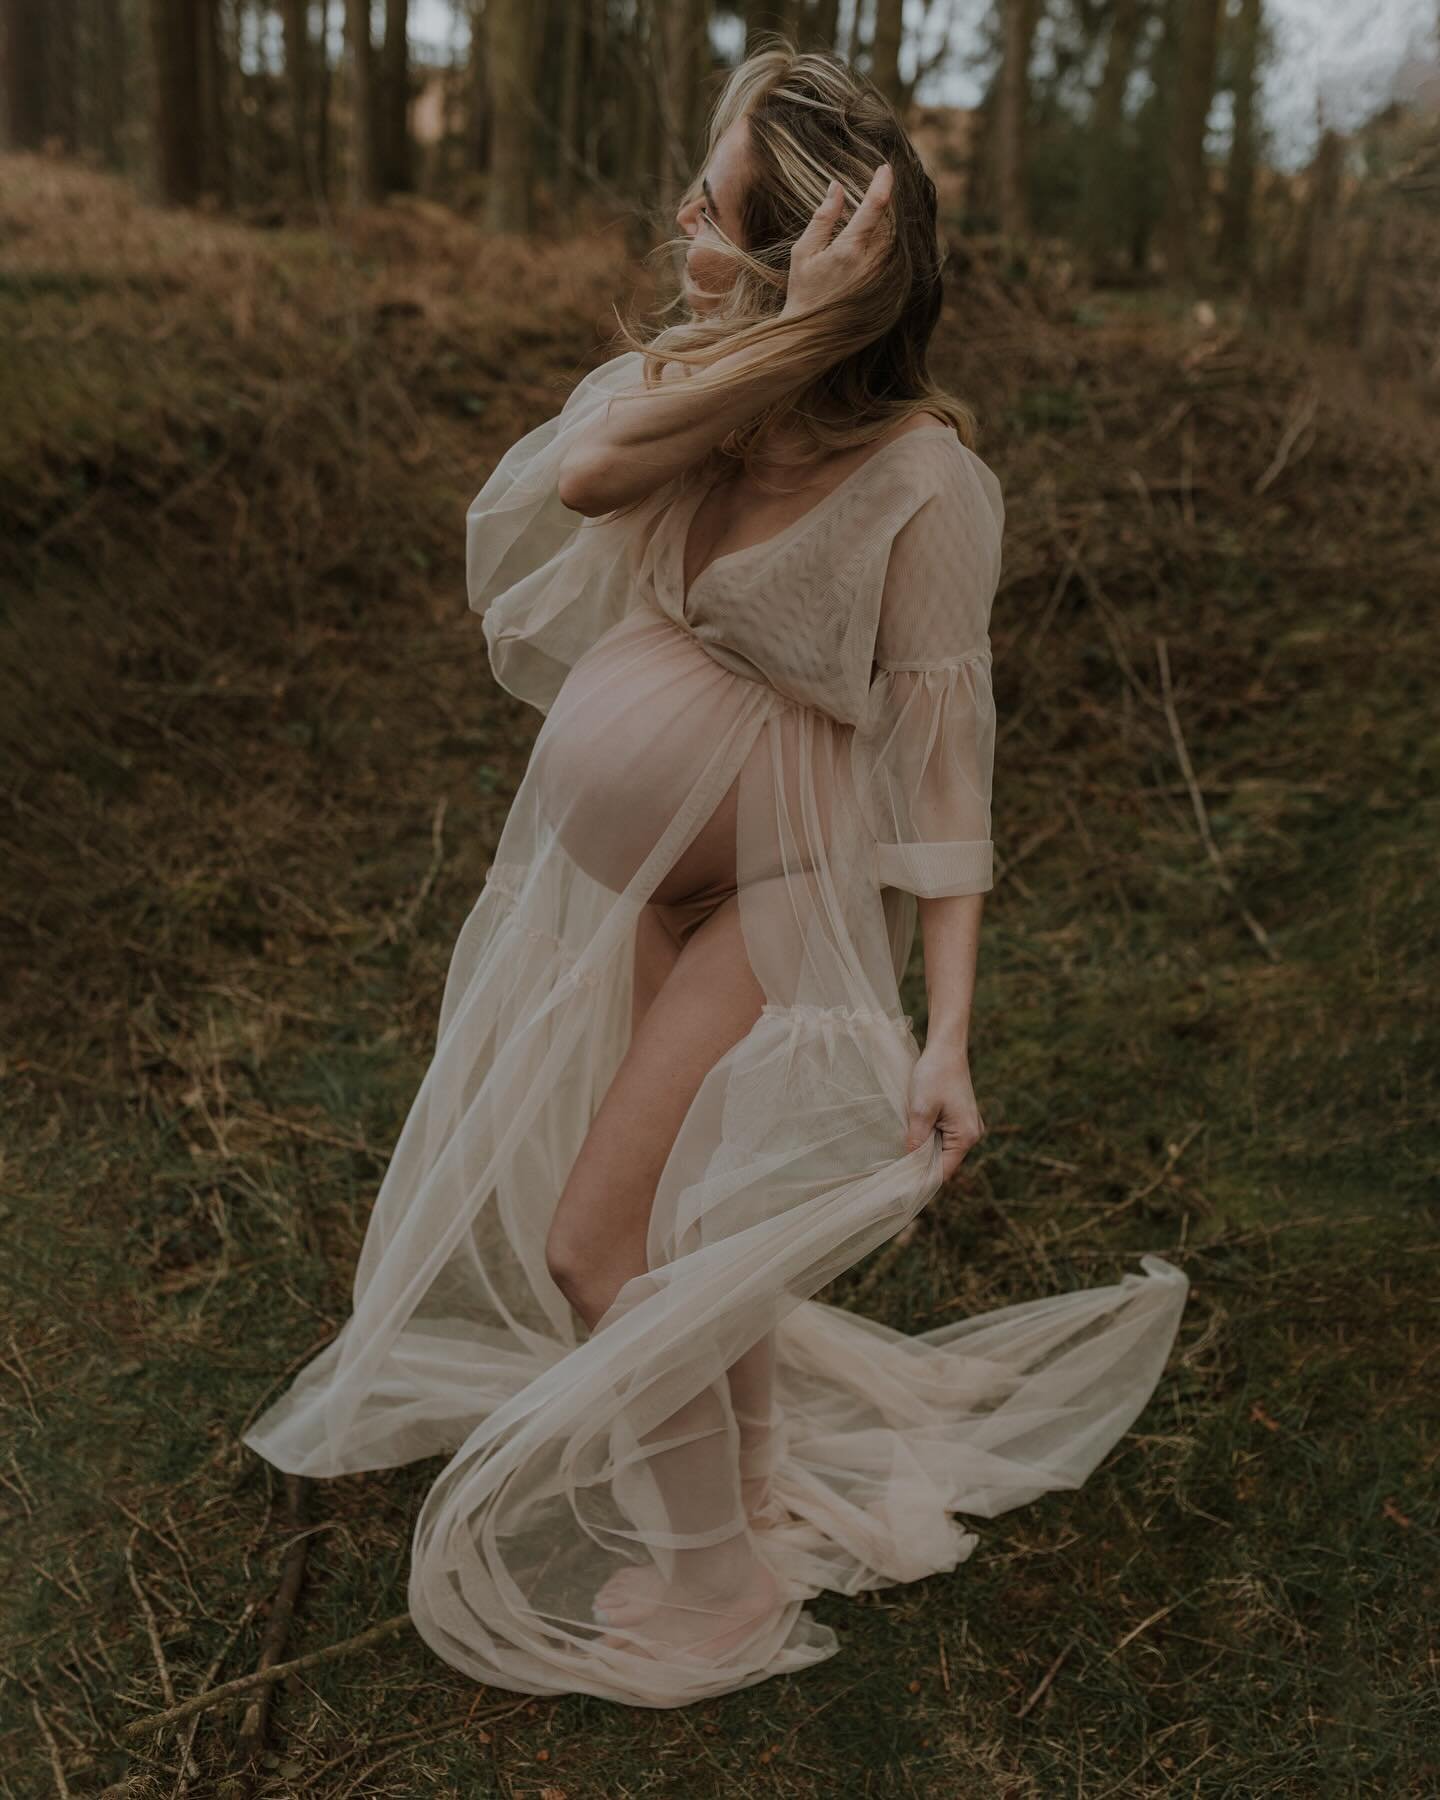 the time of love and longing for someone you have not met yet ❤️

@abigailboyes as Mother Earth/woodland fairy 🧚